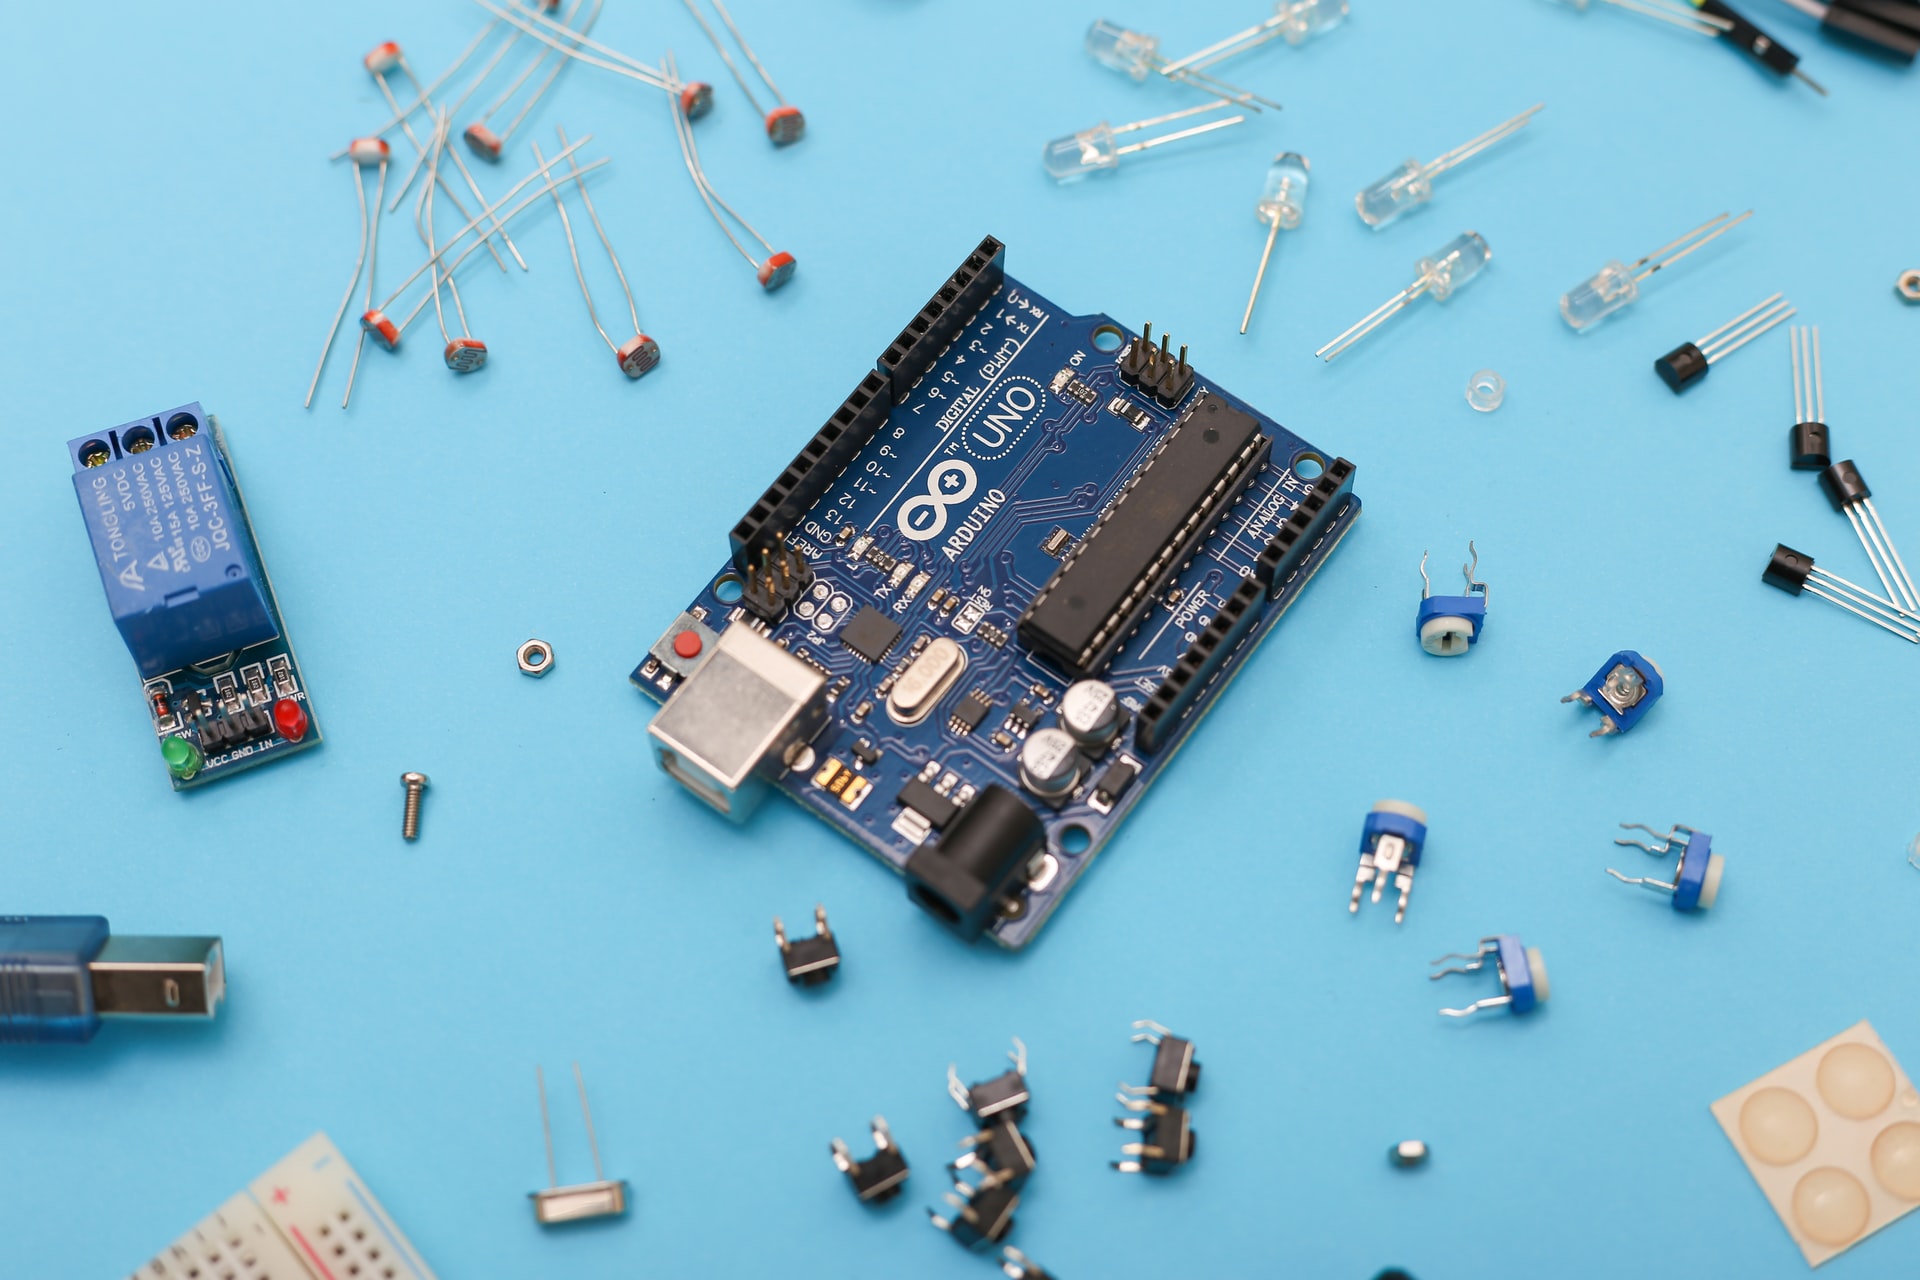 Geek insider, geekinsider, geekinsider. Com,, 15 awesome arduino projects for beginners, applications